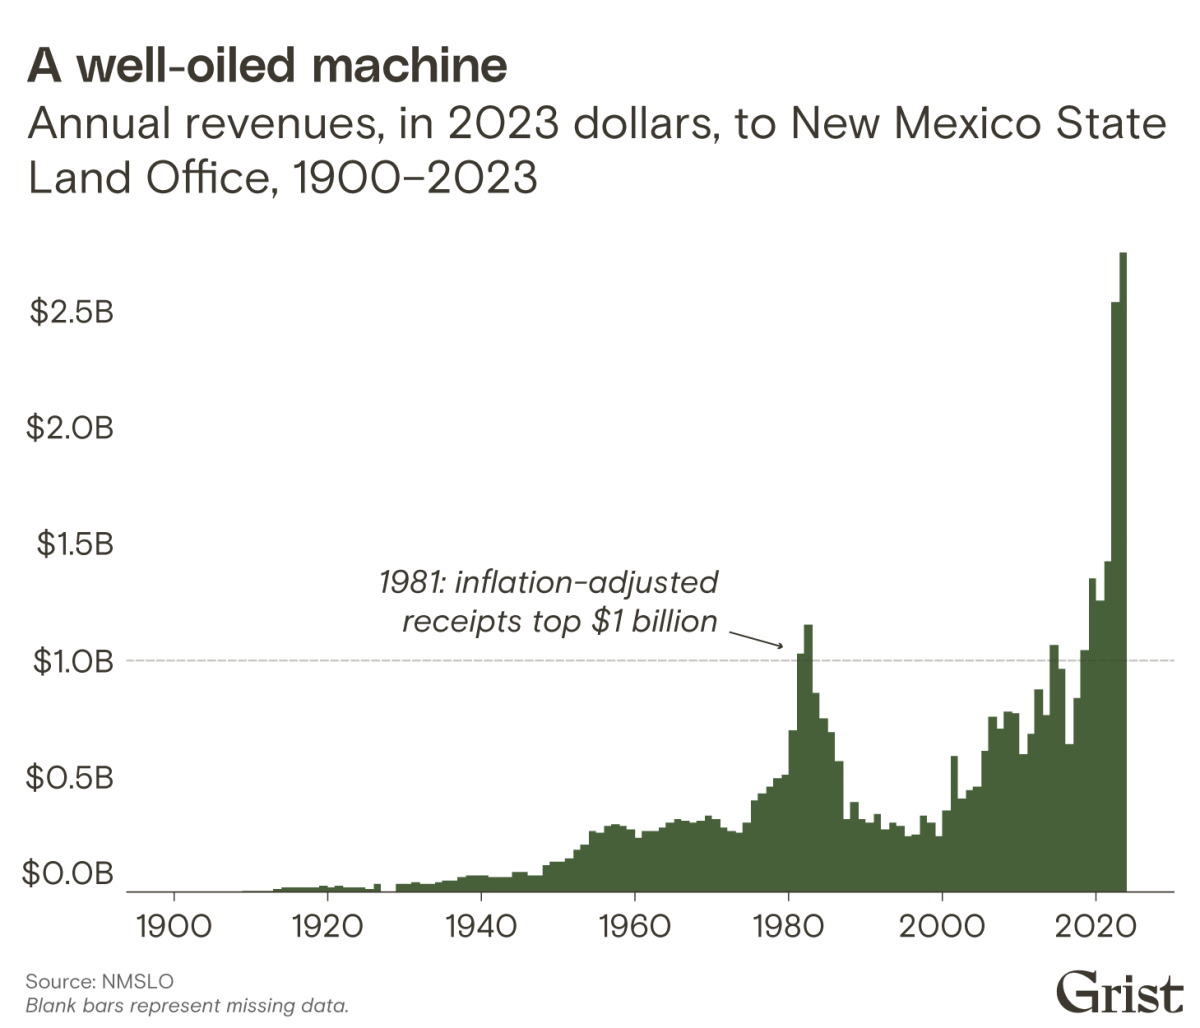 A bar chart showing annual oil revenues to New Mexico State Land Office from 1925 to 2022.